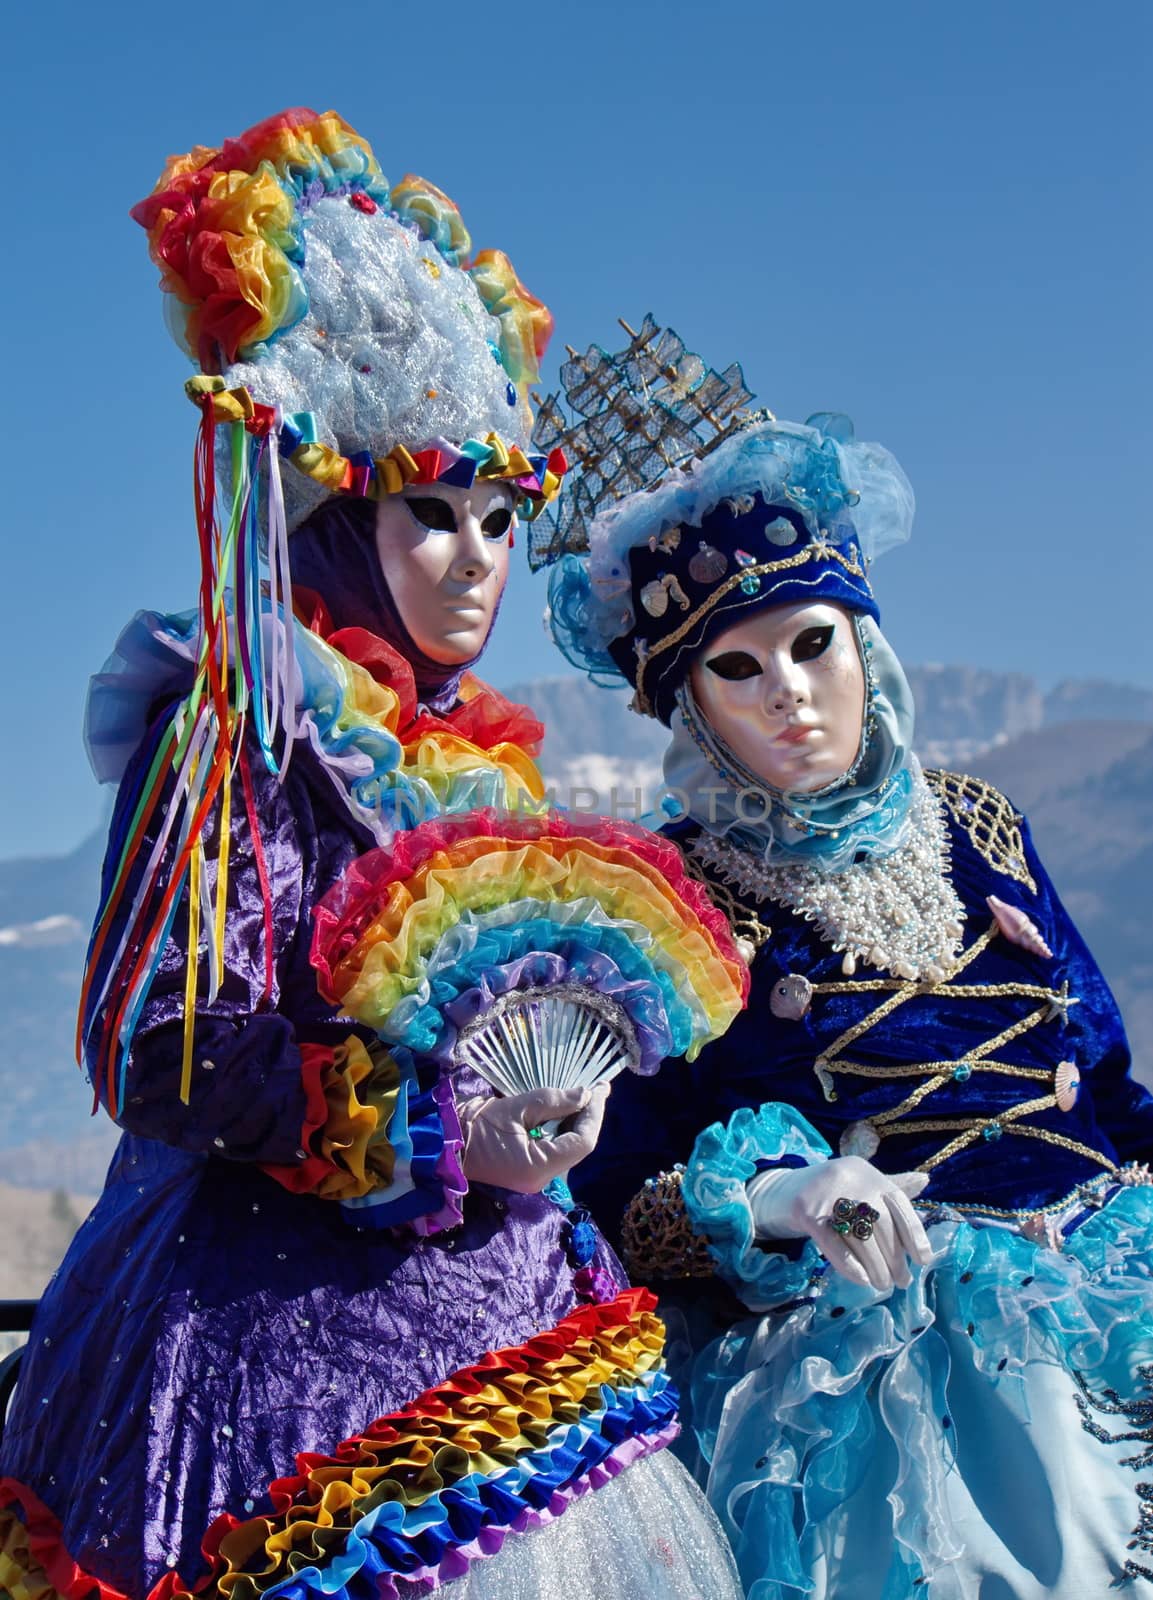 Two females portrait at the carnival in Annecy, France by Elenaphotos21